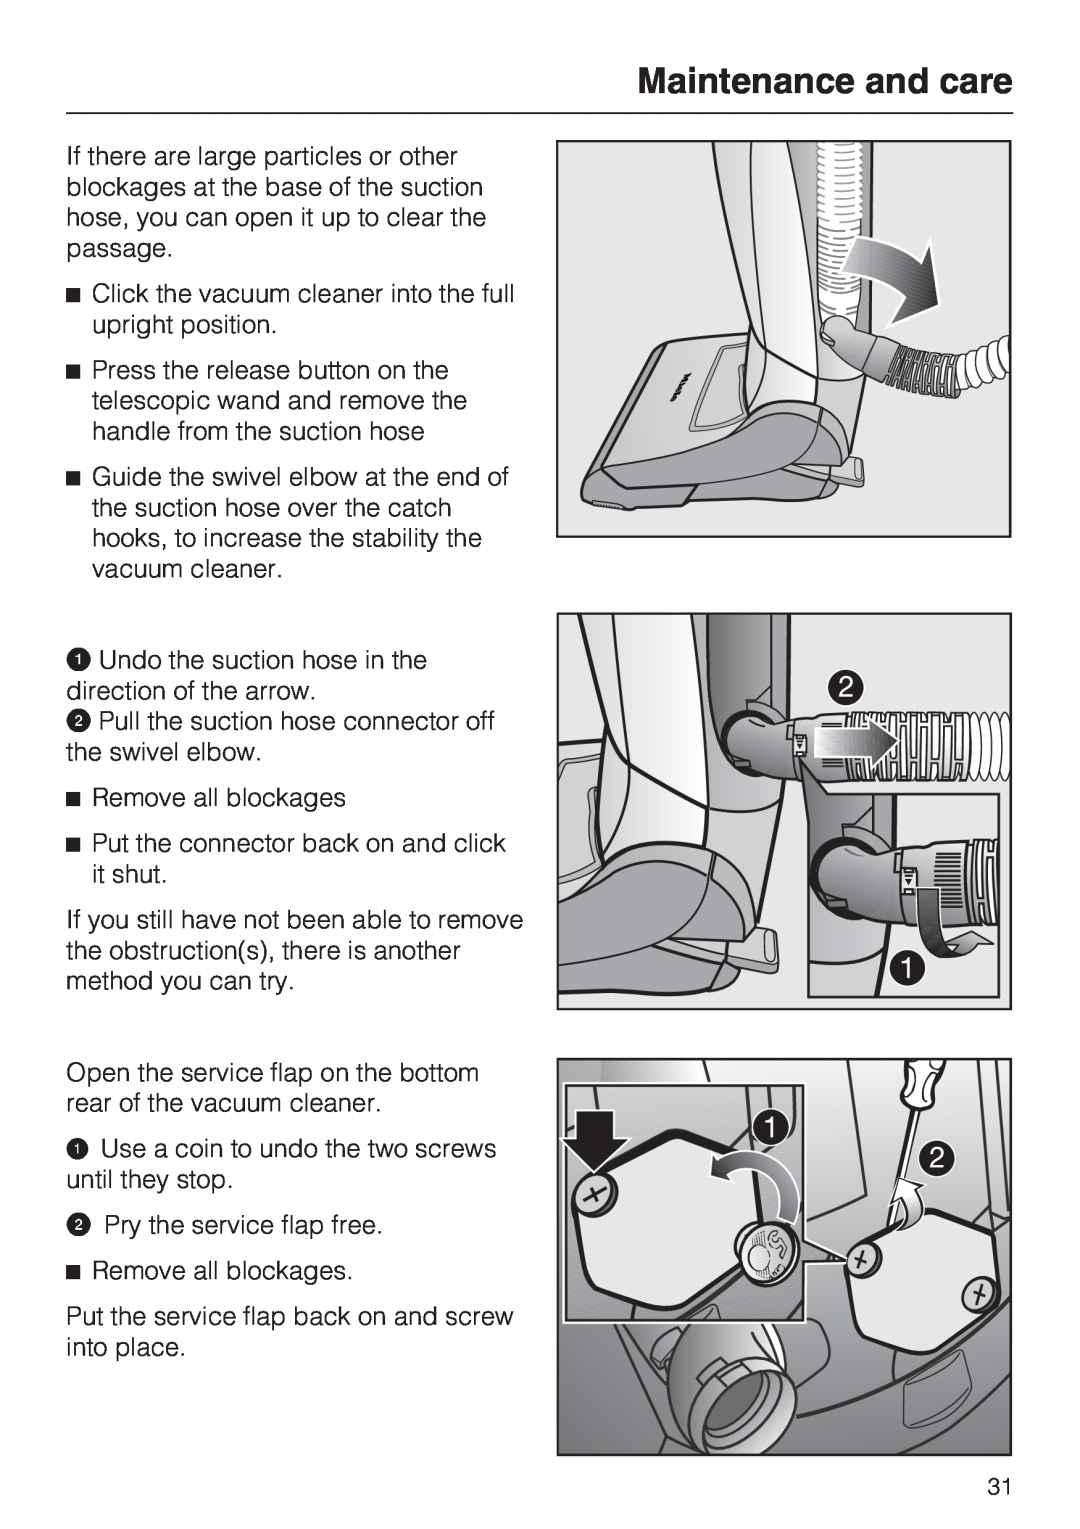 Miele S 7000 operating instructions Maintenance and care, Remove all blockages 